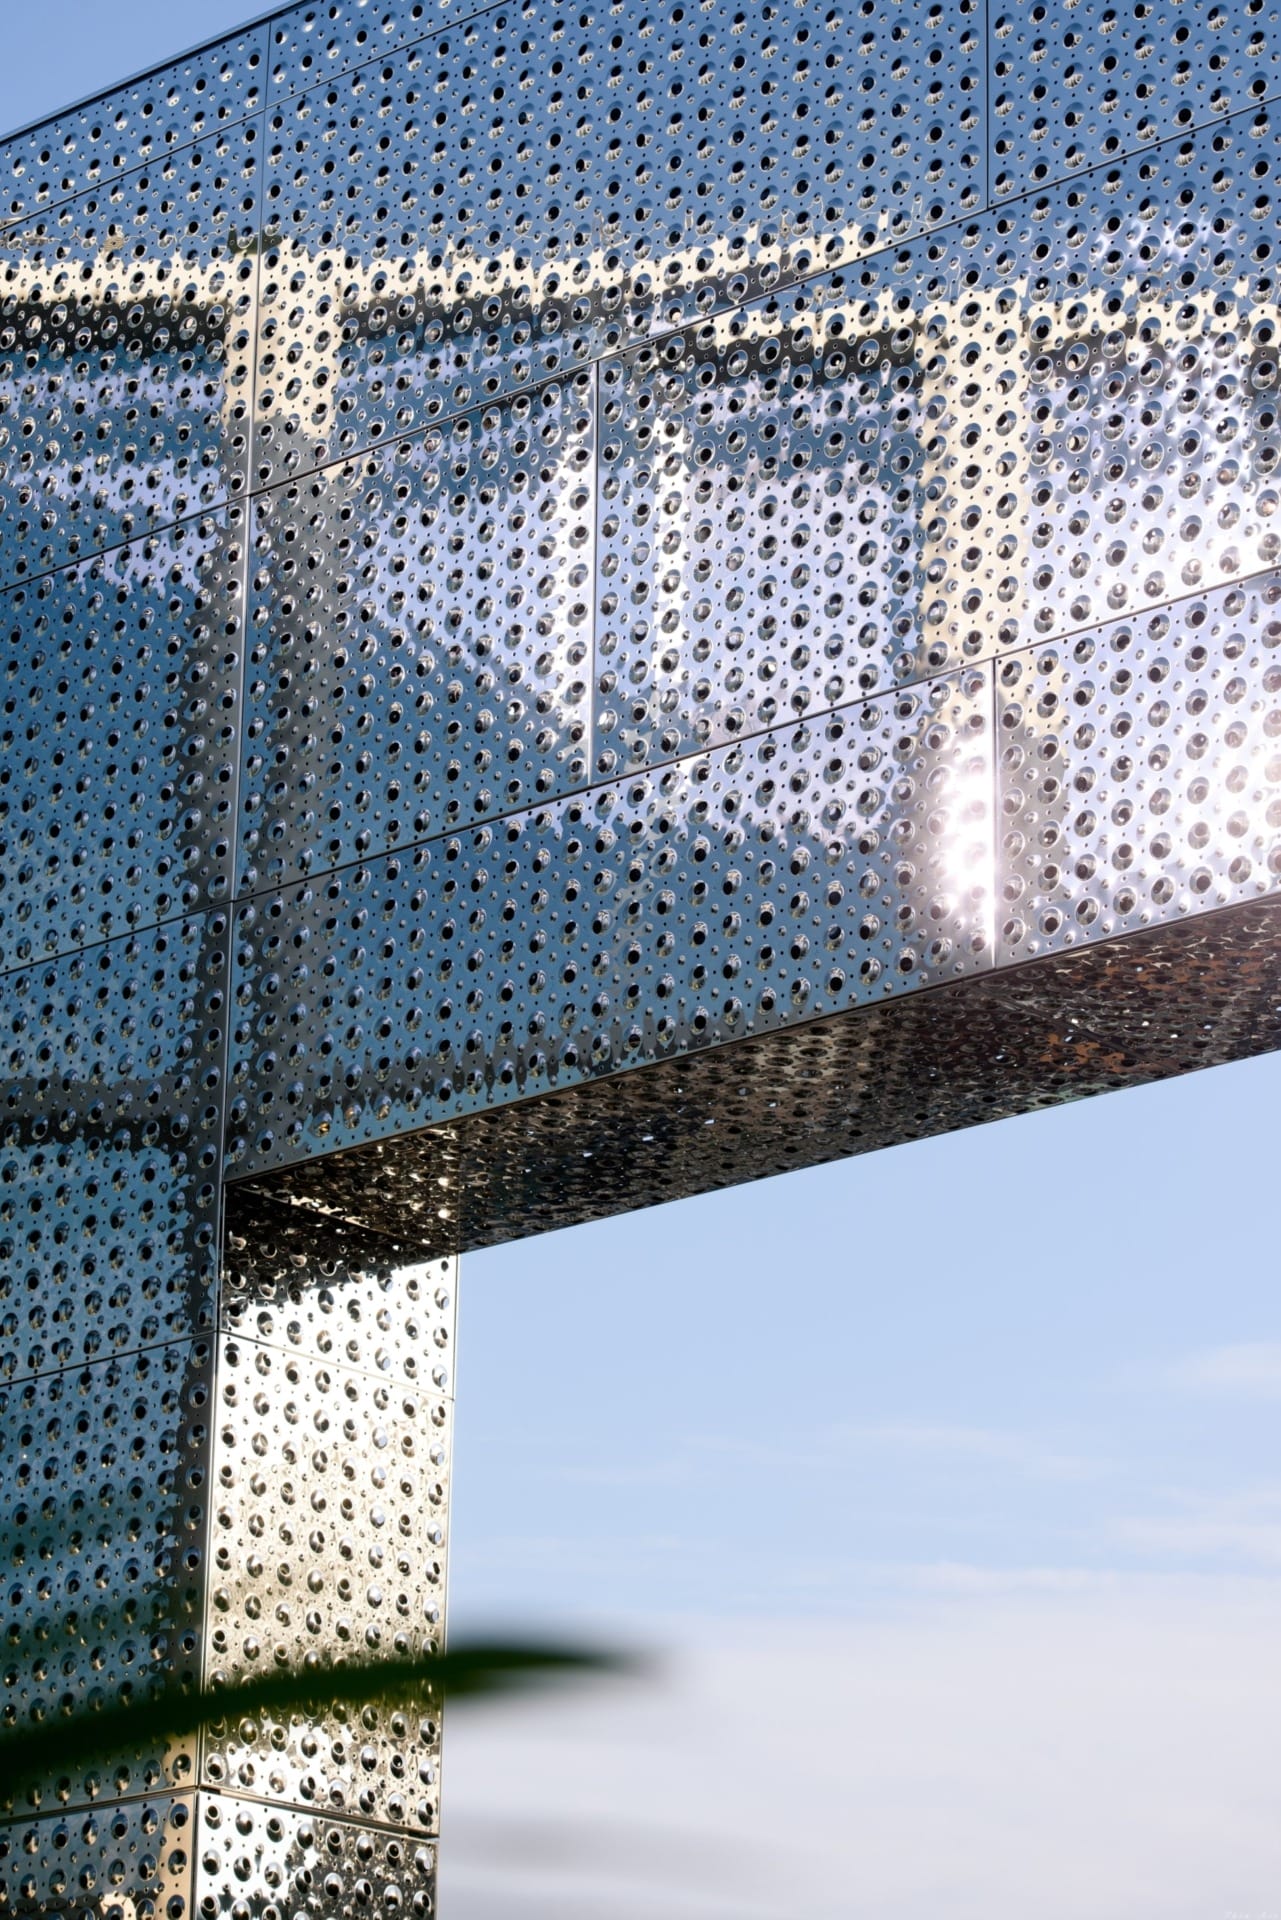 Detail of the custom perforated emboss used to bump and perf the stainless steel facade.